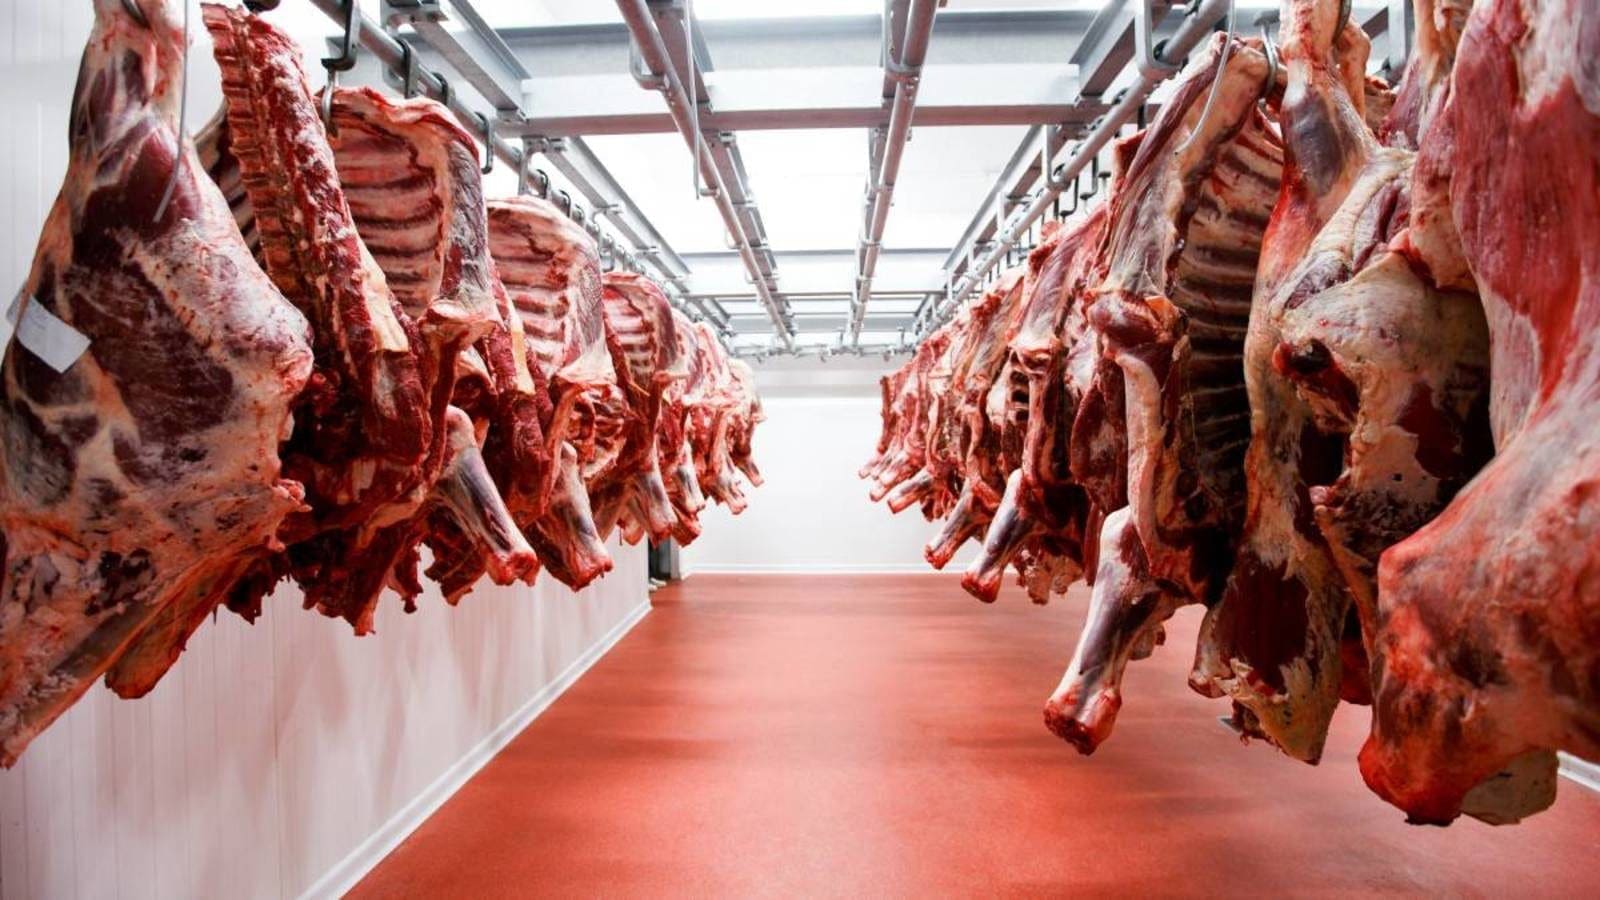 MeatCo reports 86% meat production increment